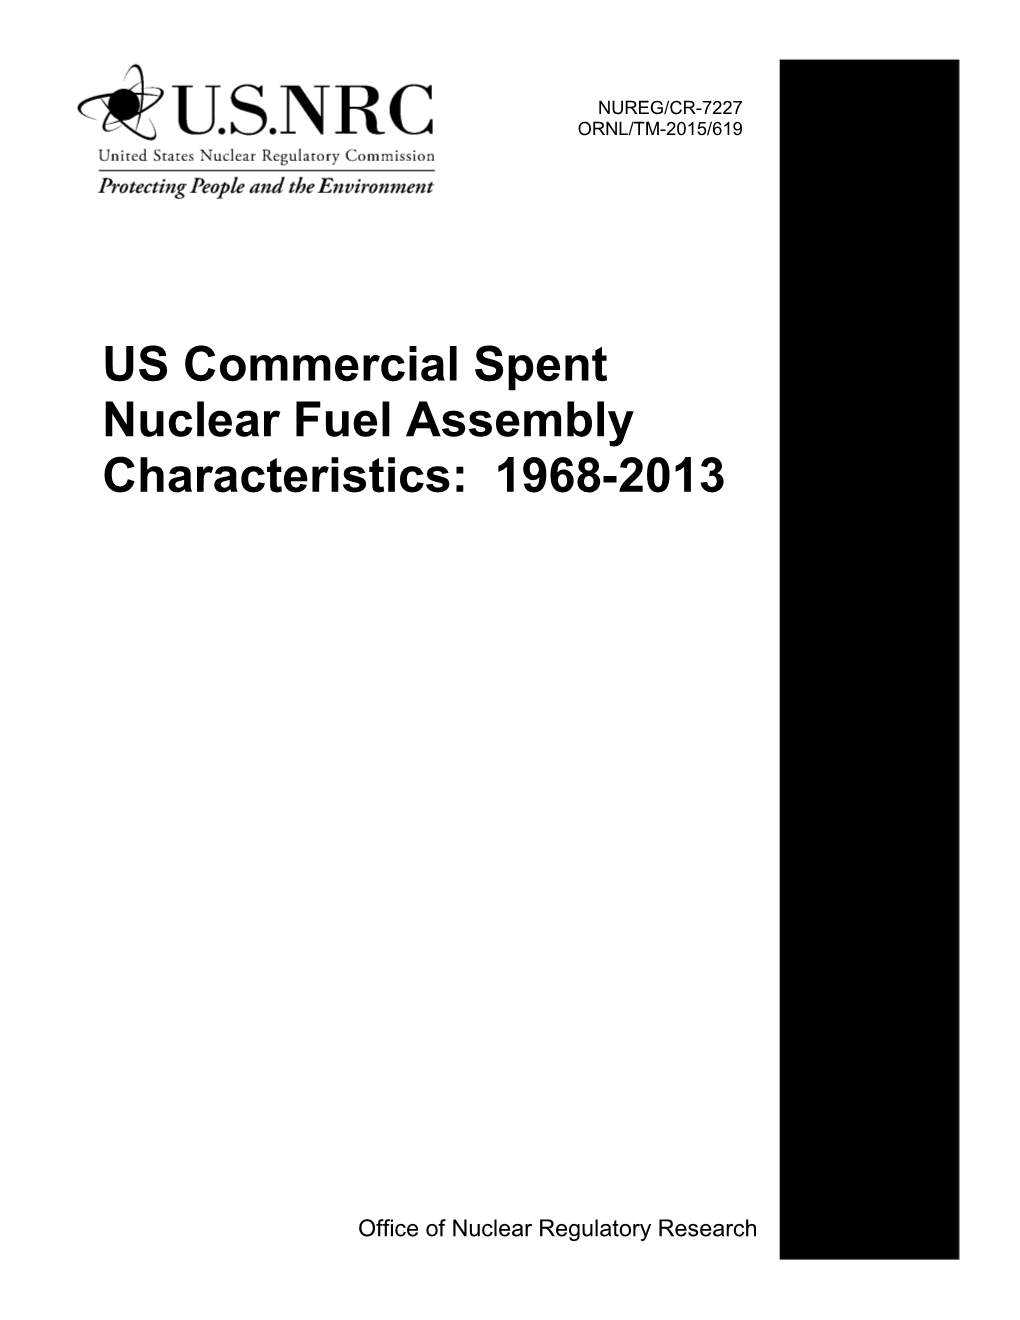 U.S. Commercial Spent Nuclear Fuel Assembly Characteristics